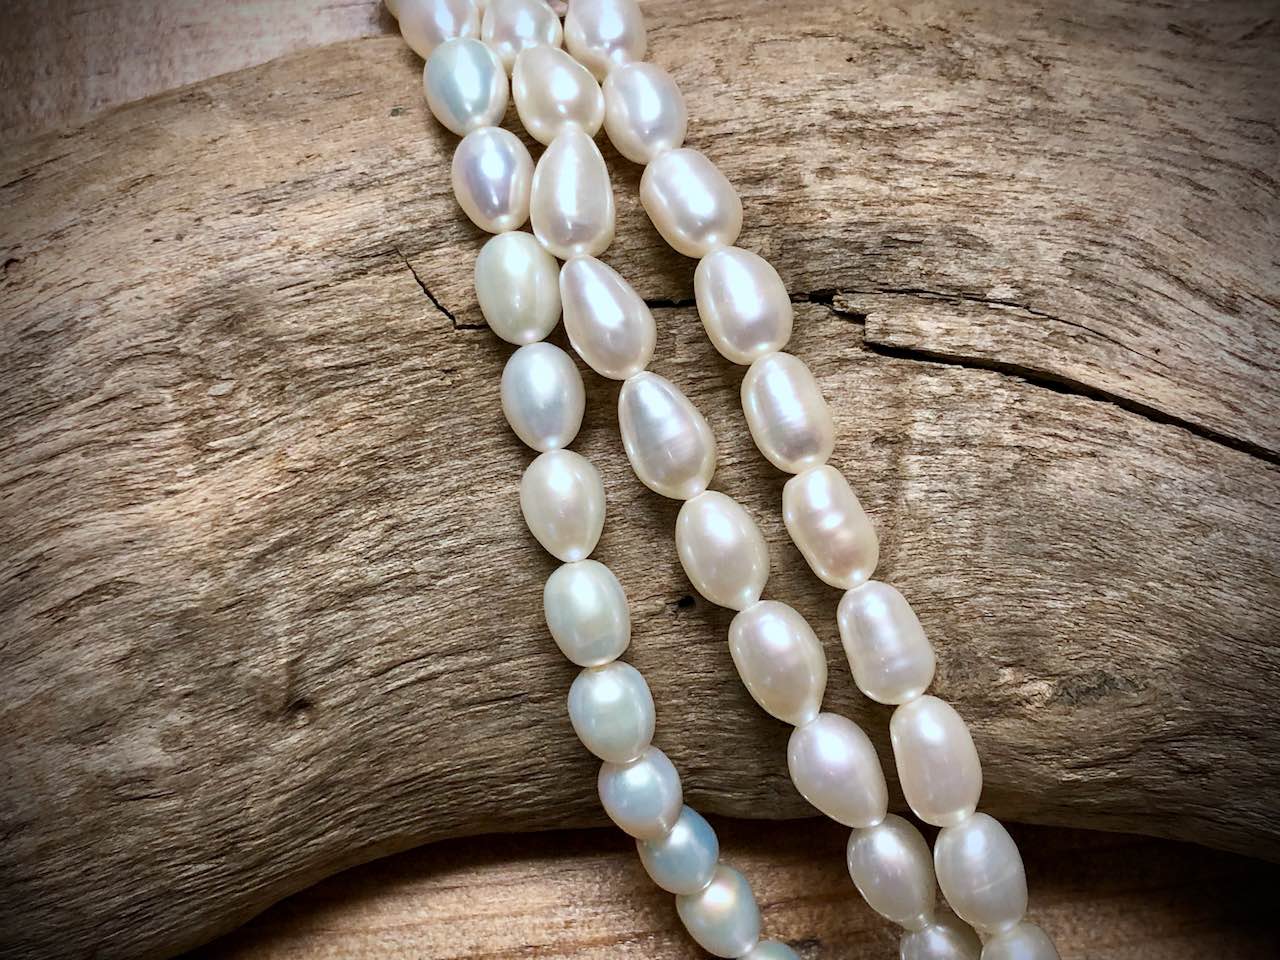 Old-Stock, Vintage Freshwater Pearls - 7-8mm x 6mm - 16”